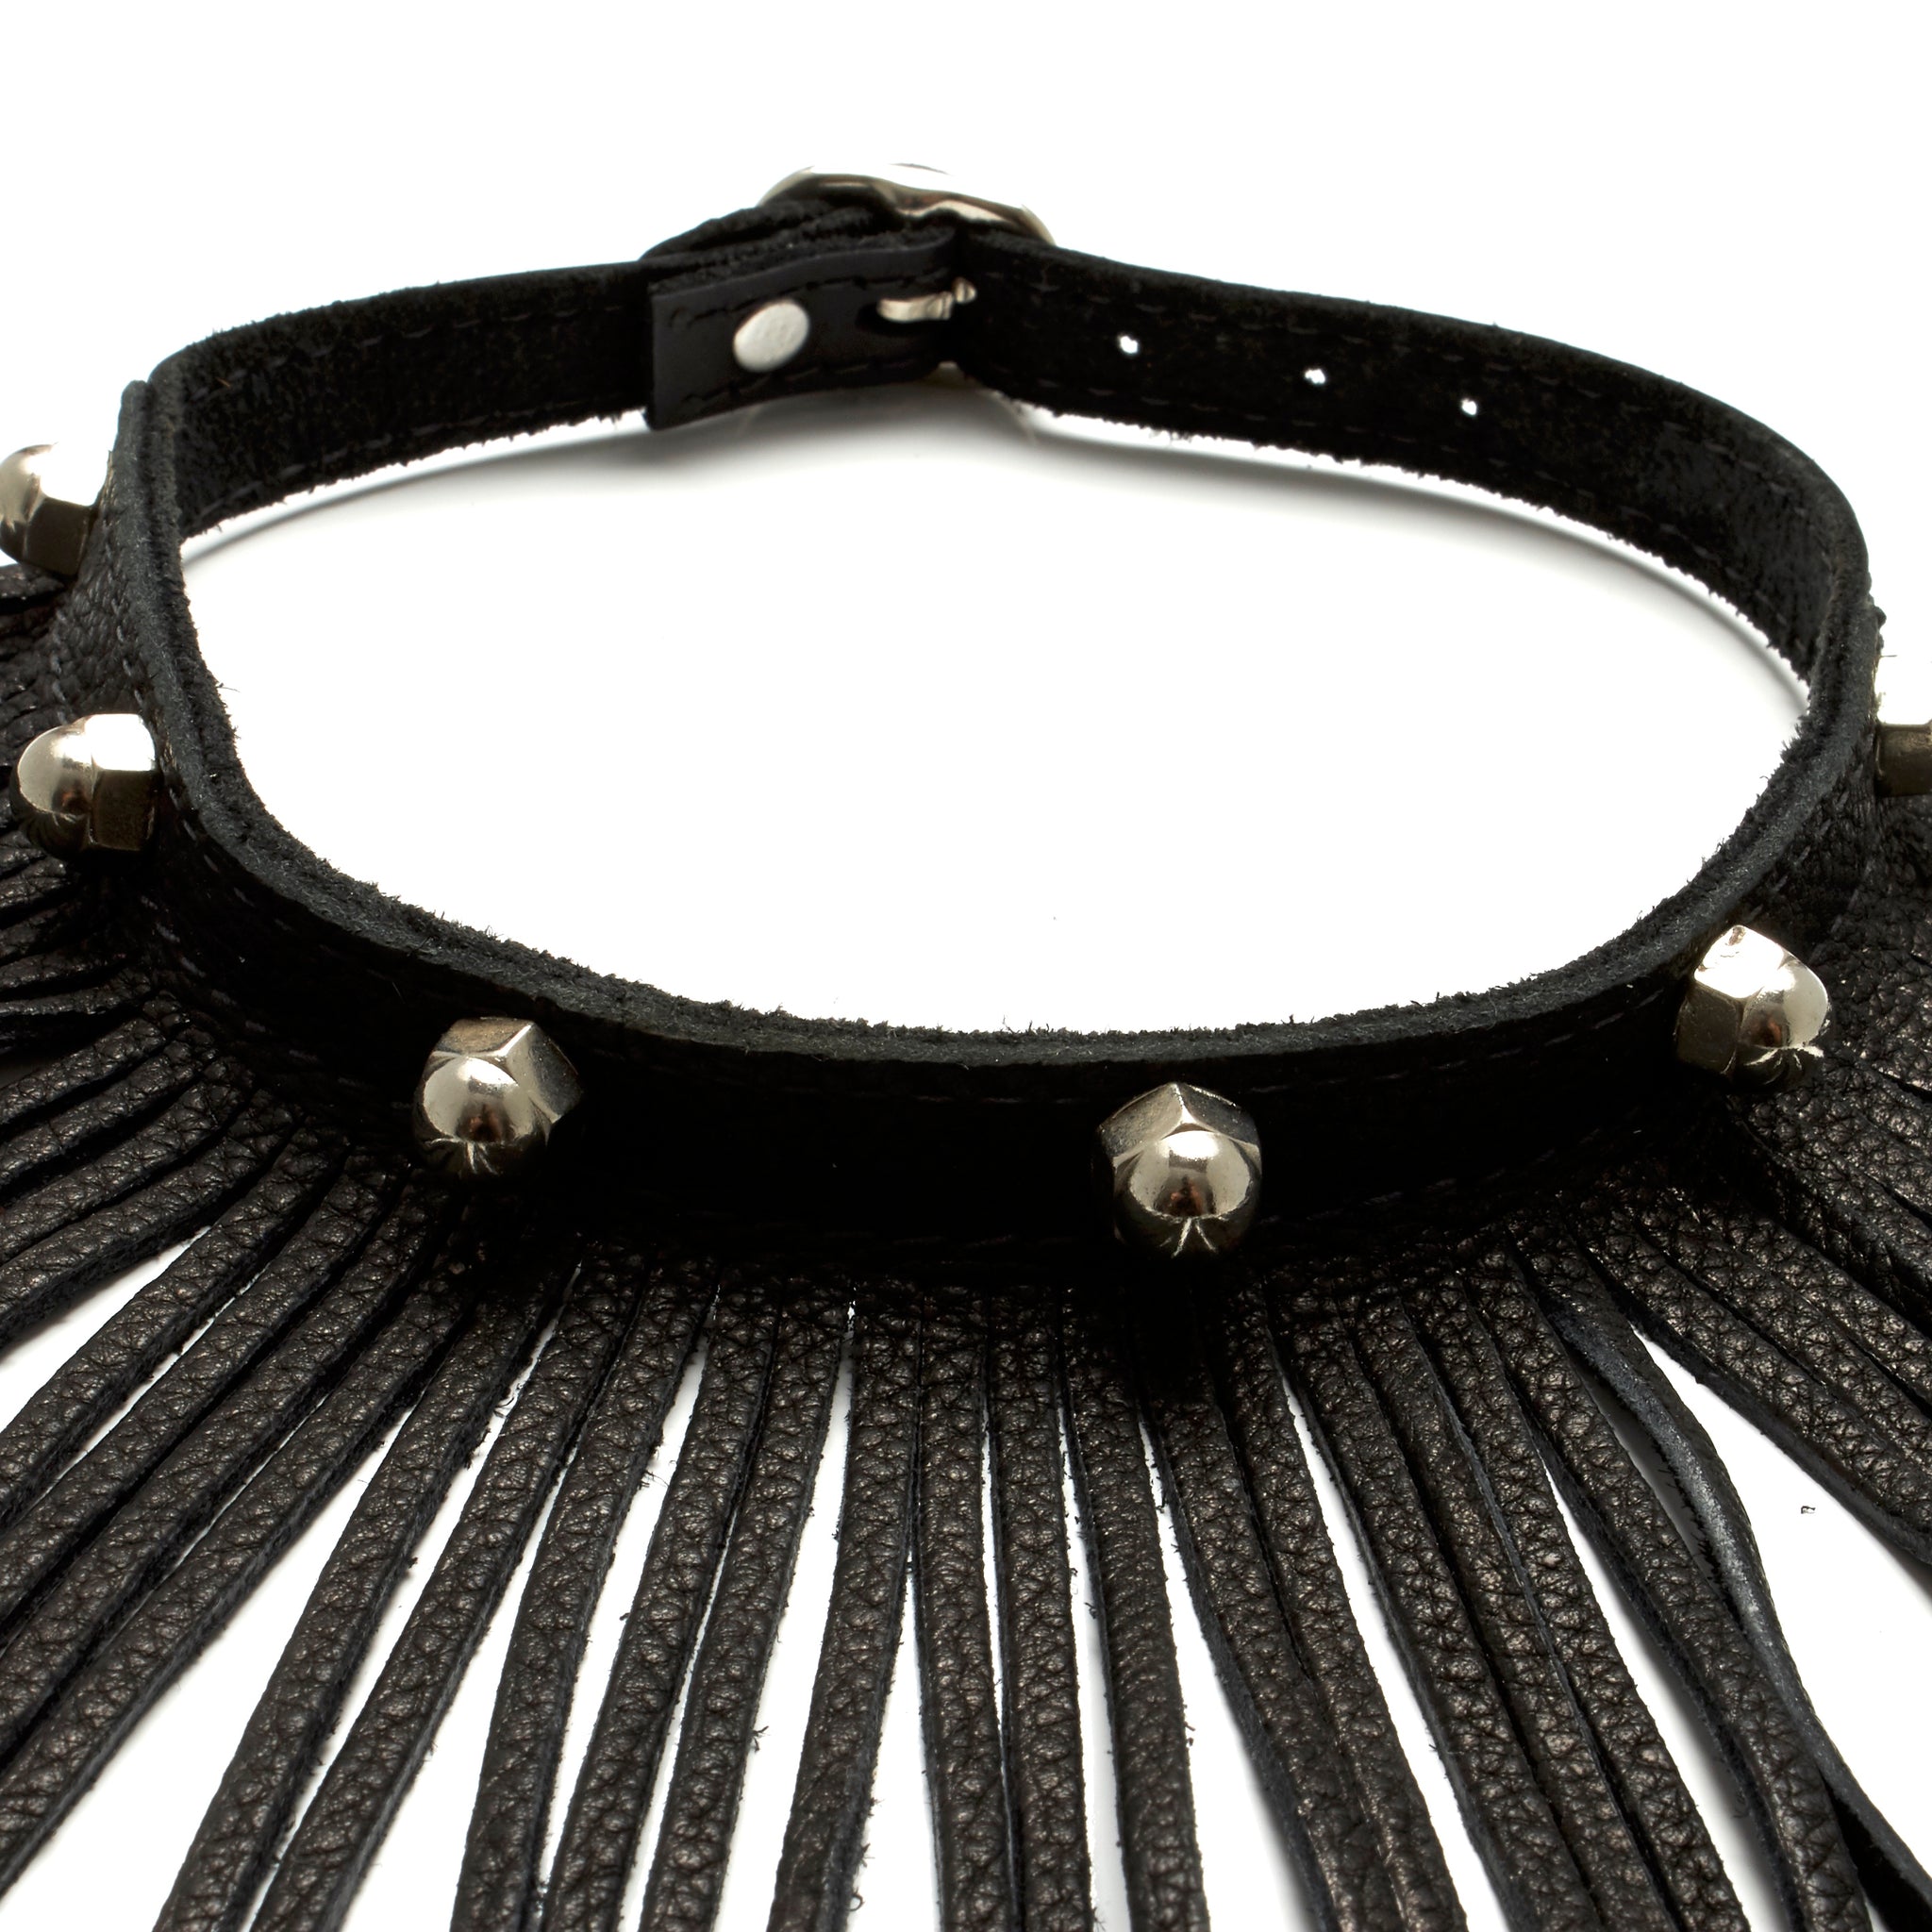 LEATHER CHOKER NECKLACE WITH DEERSKIN LEATHER FRINGE AND STAINLESS STEEL HARDWARE by nyet jewelry